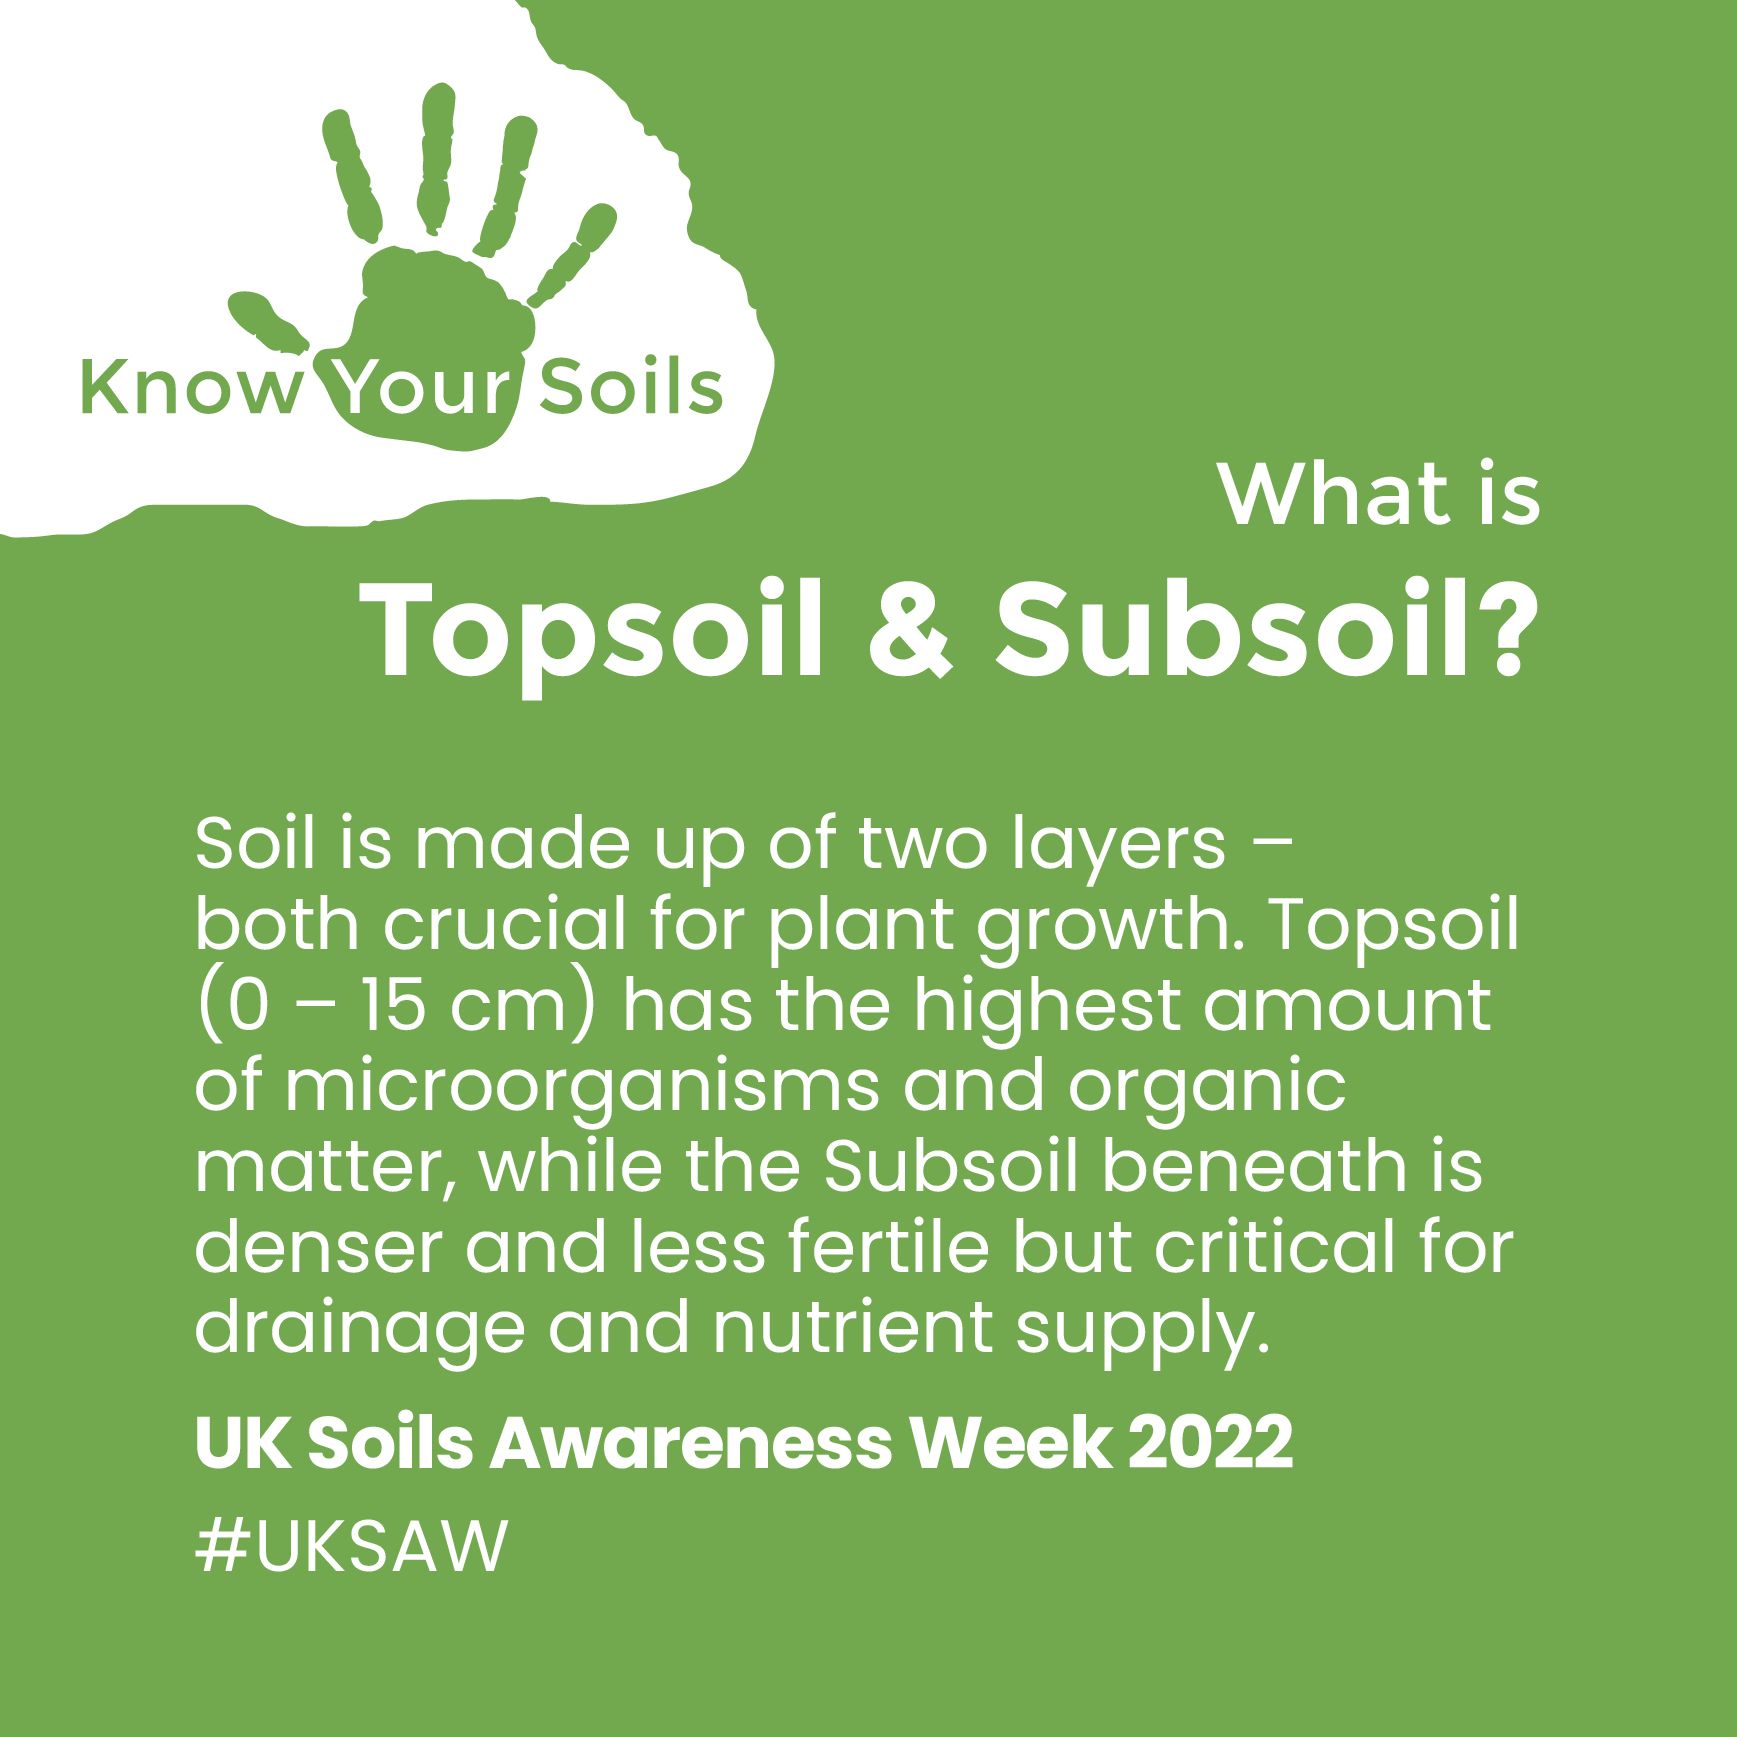 Topsoil and subsoil - Text